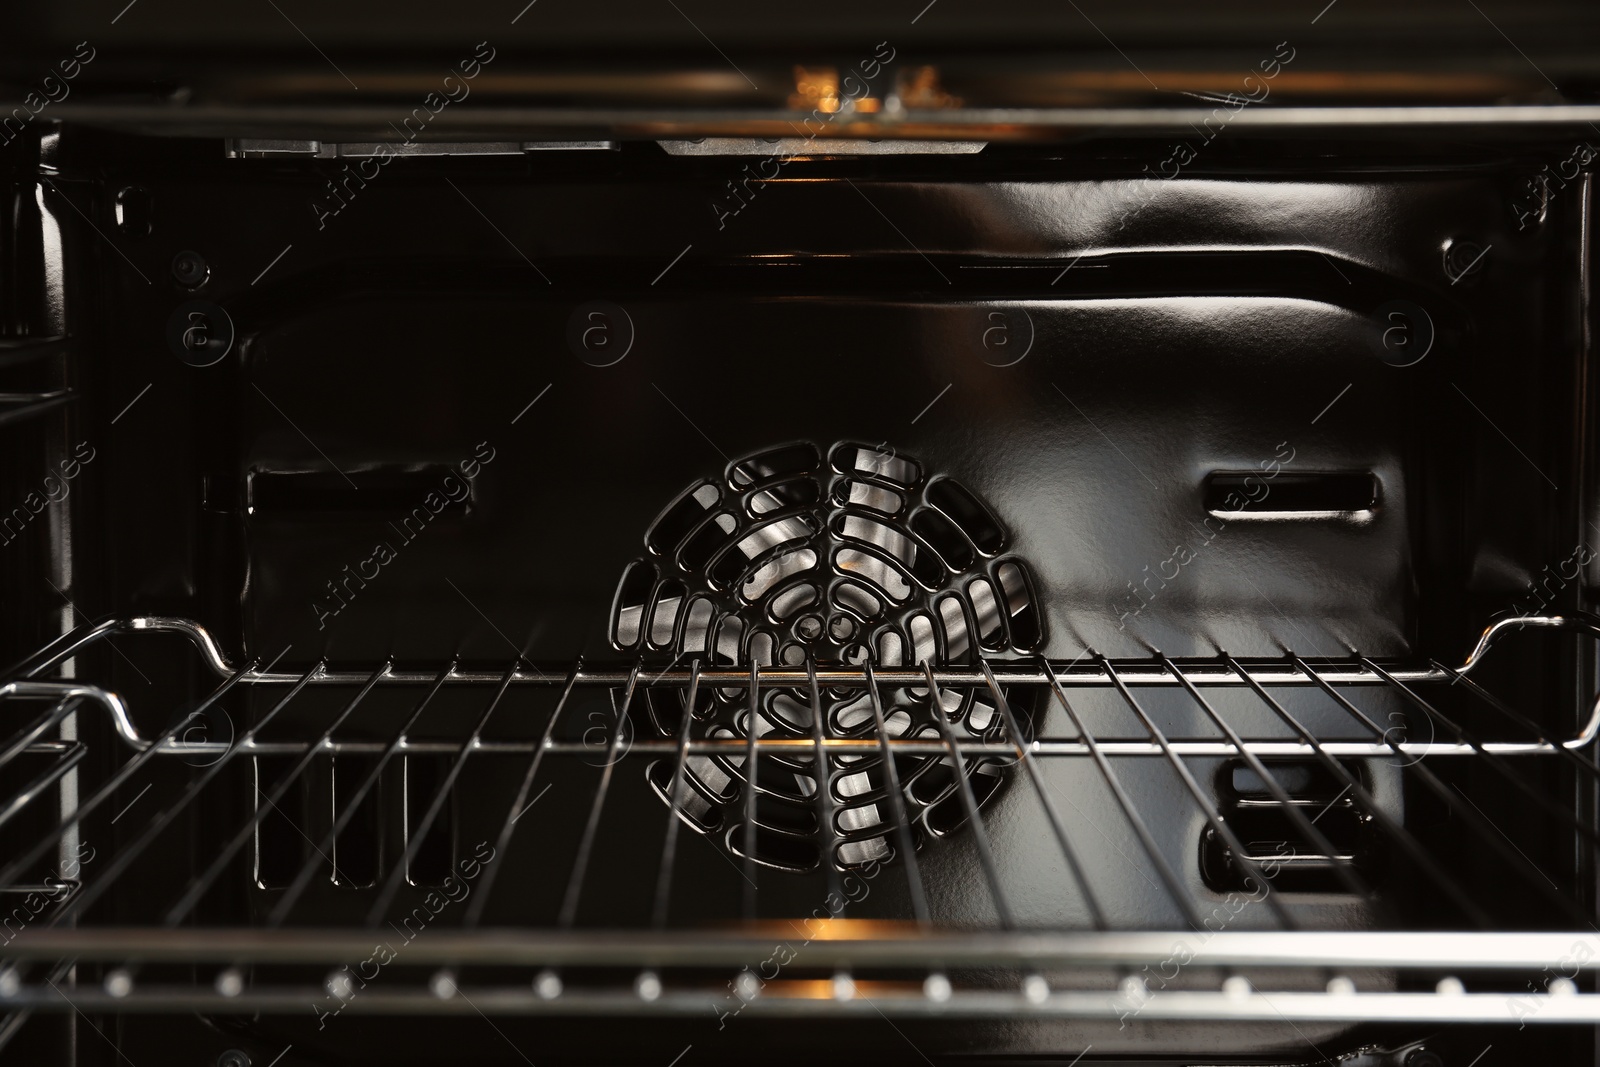 Photo of Open empty electric oven with rack, closeup. Inside view